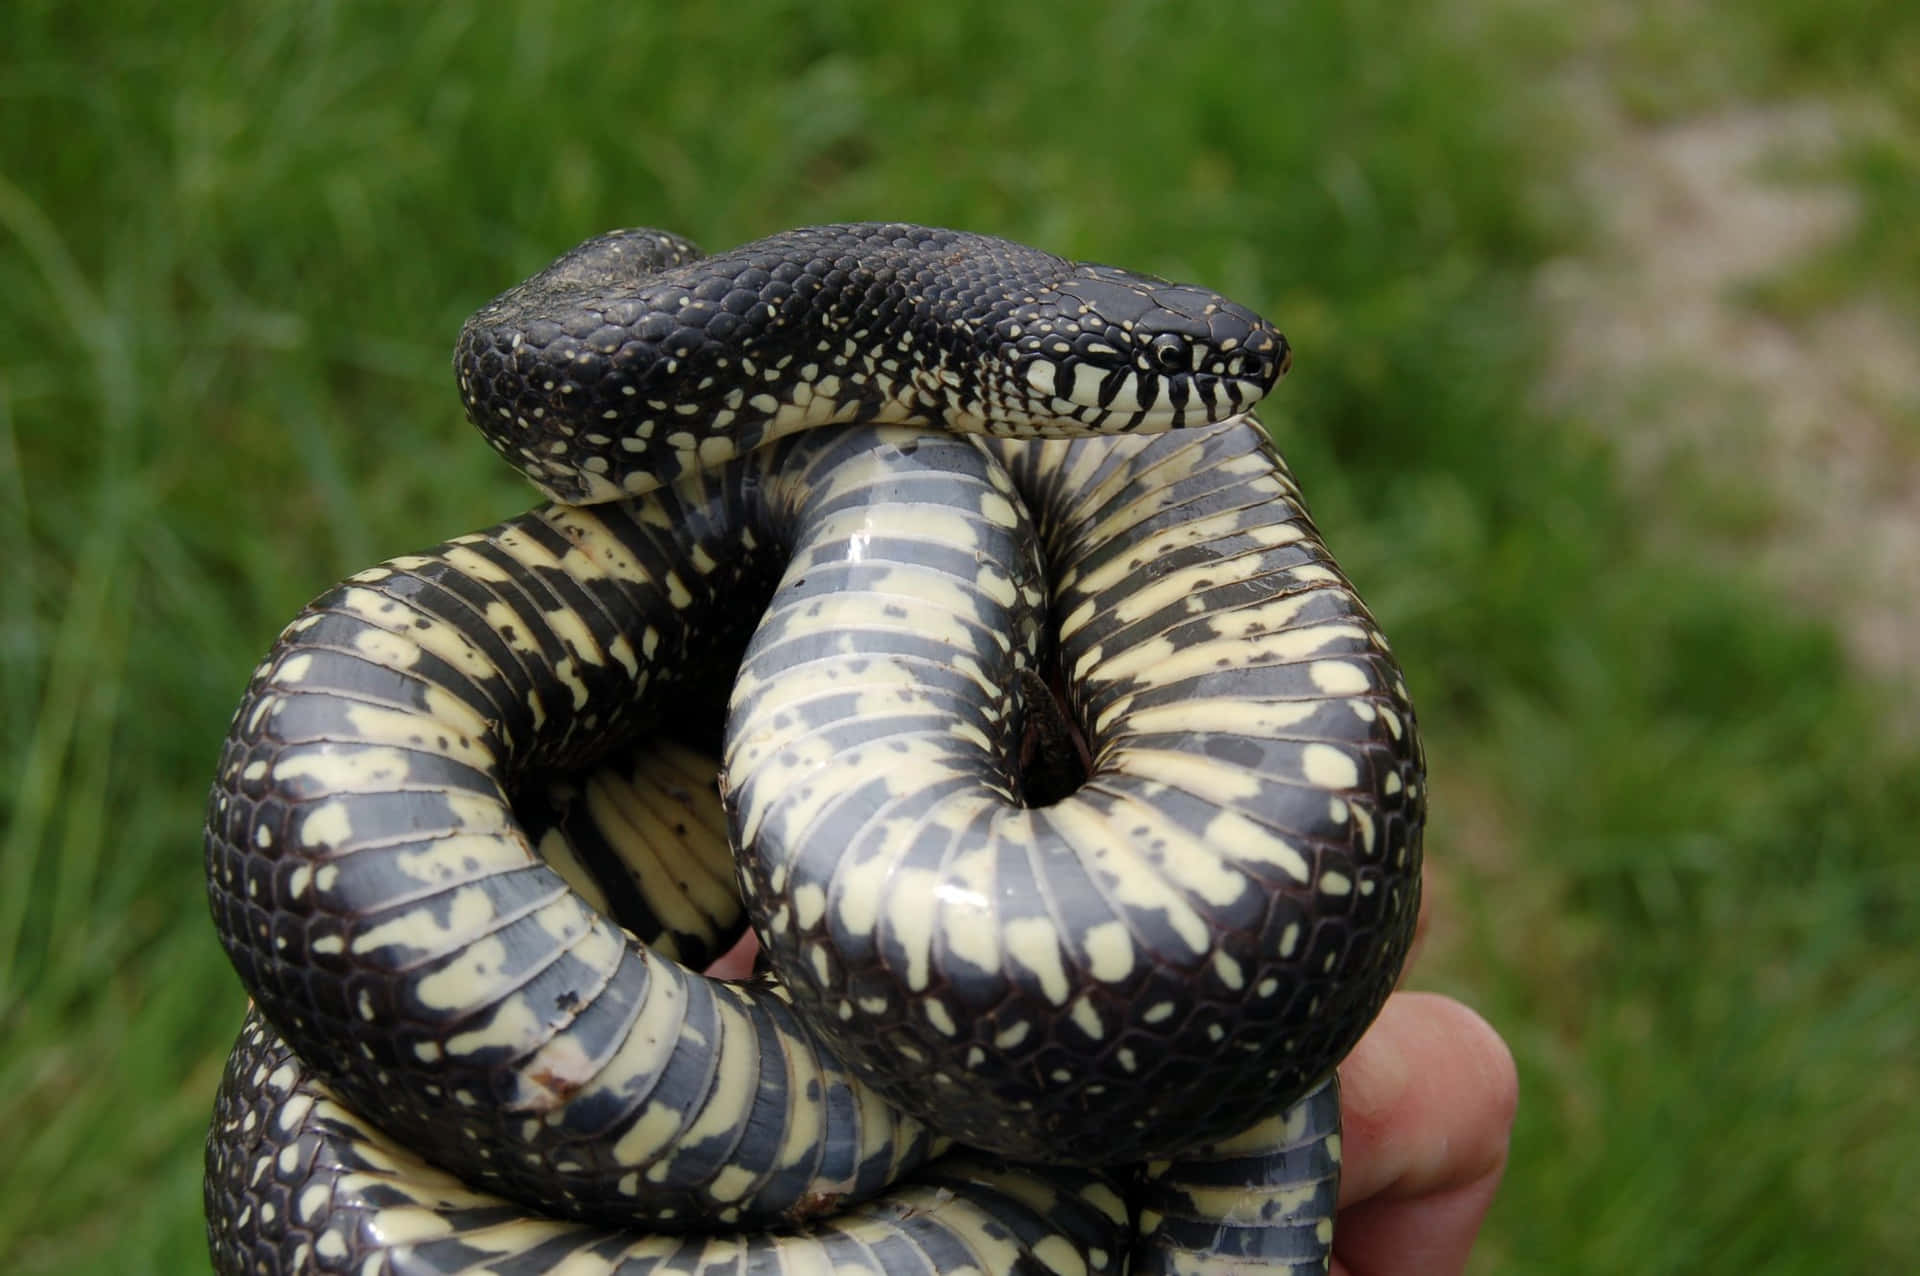 A Black And White Snake Is Being Held In A Person's Hand